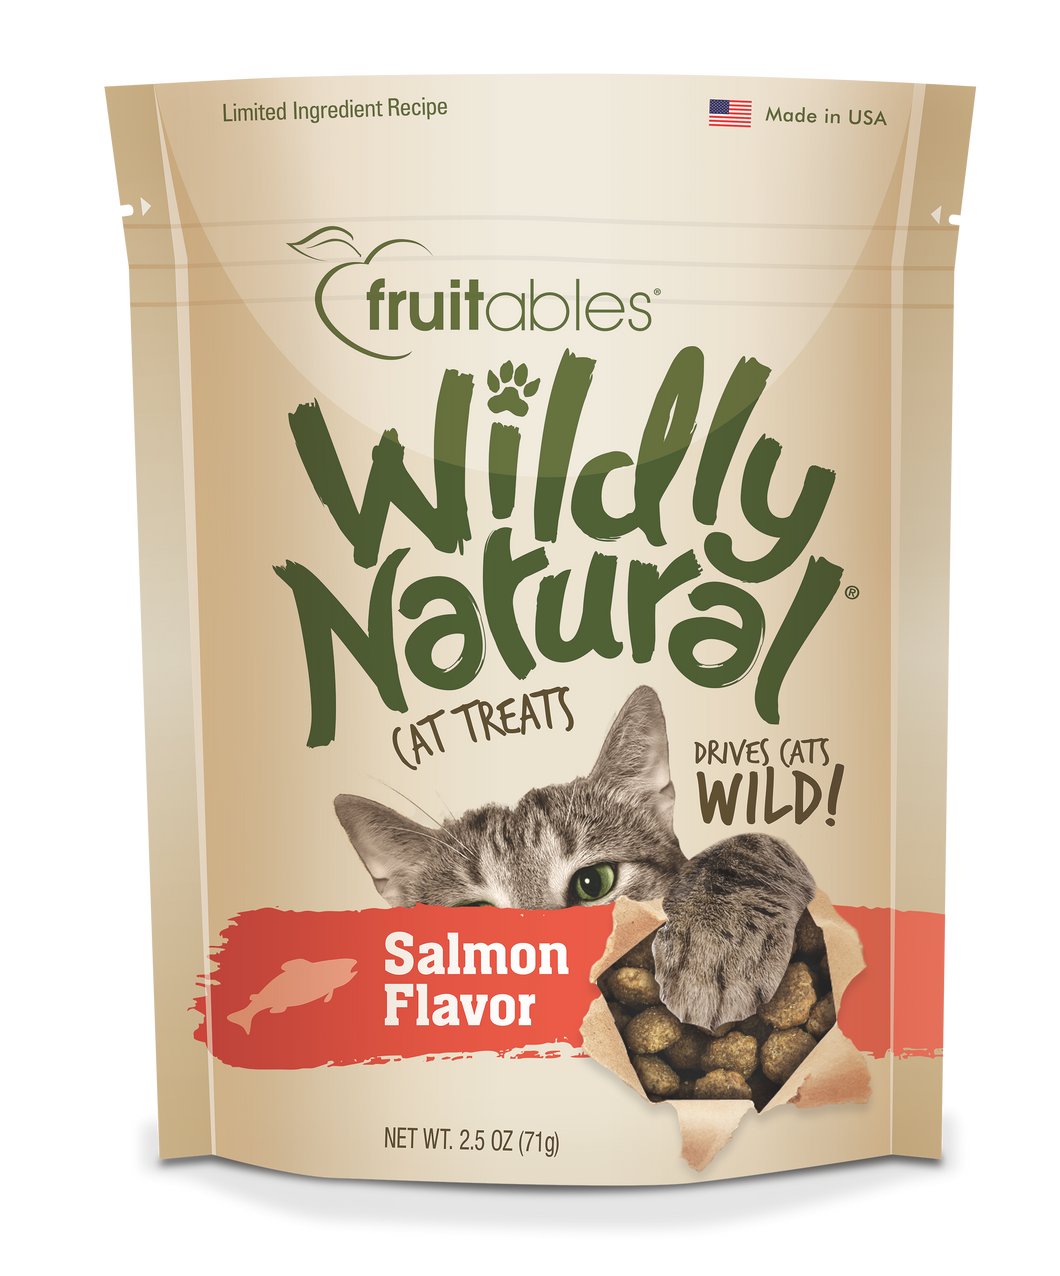 Fruitables Wildly Natural Salmon Flavor Cat Treats